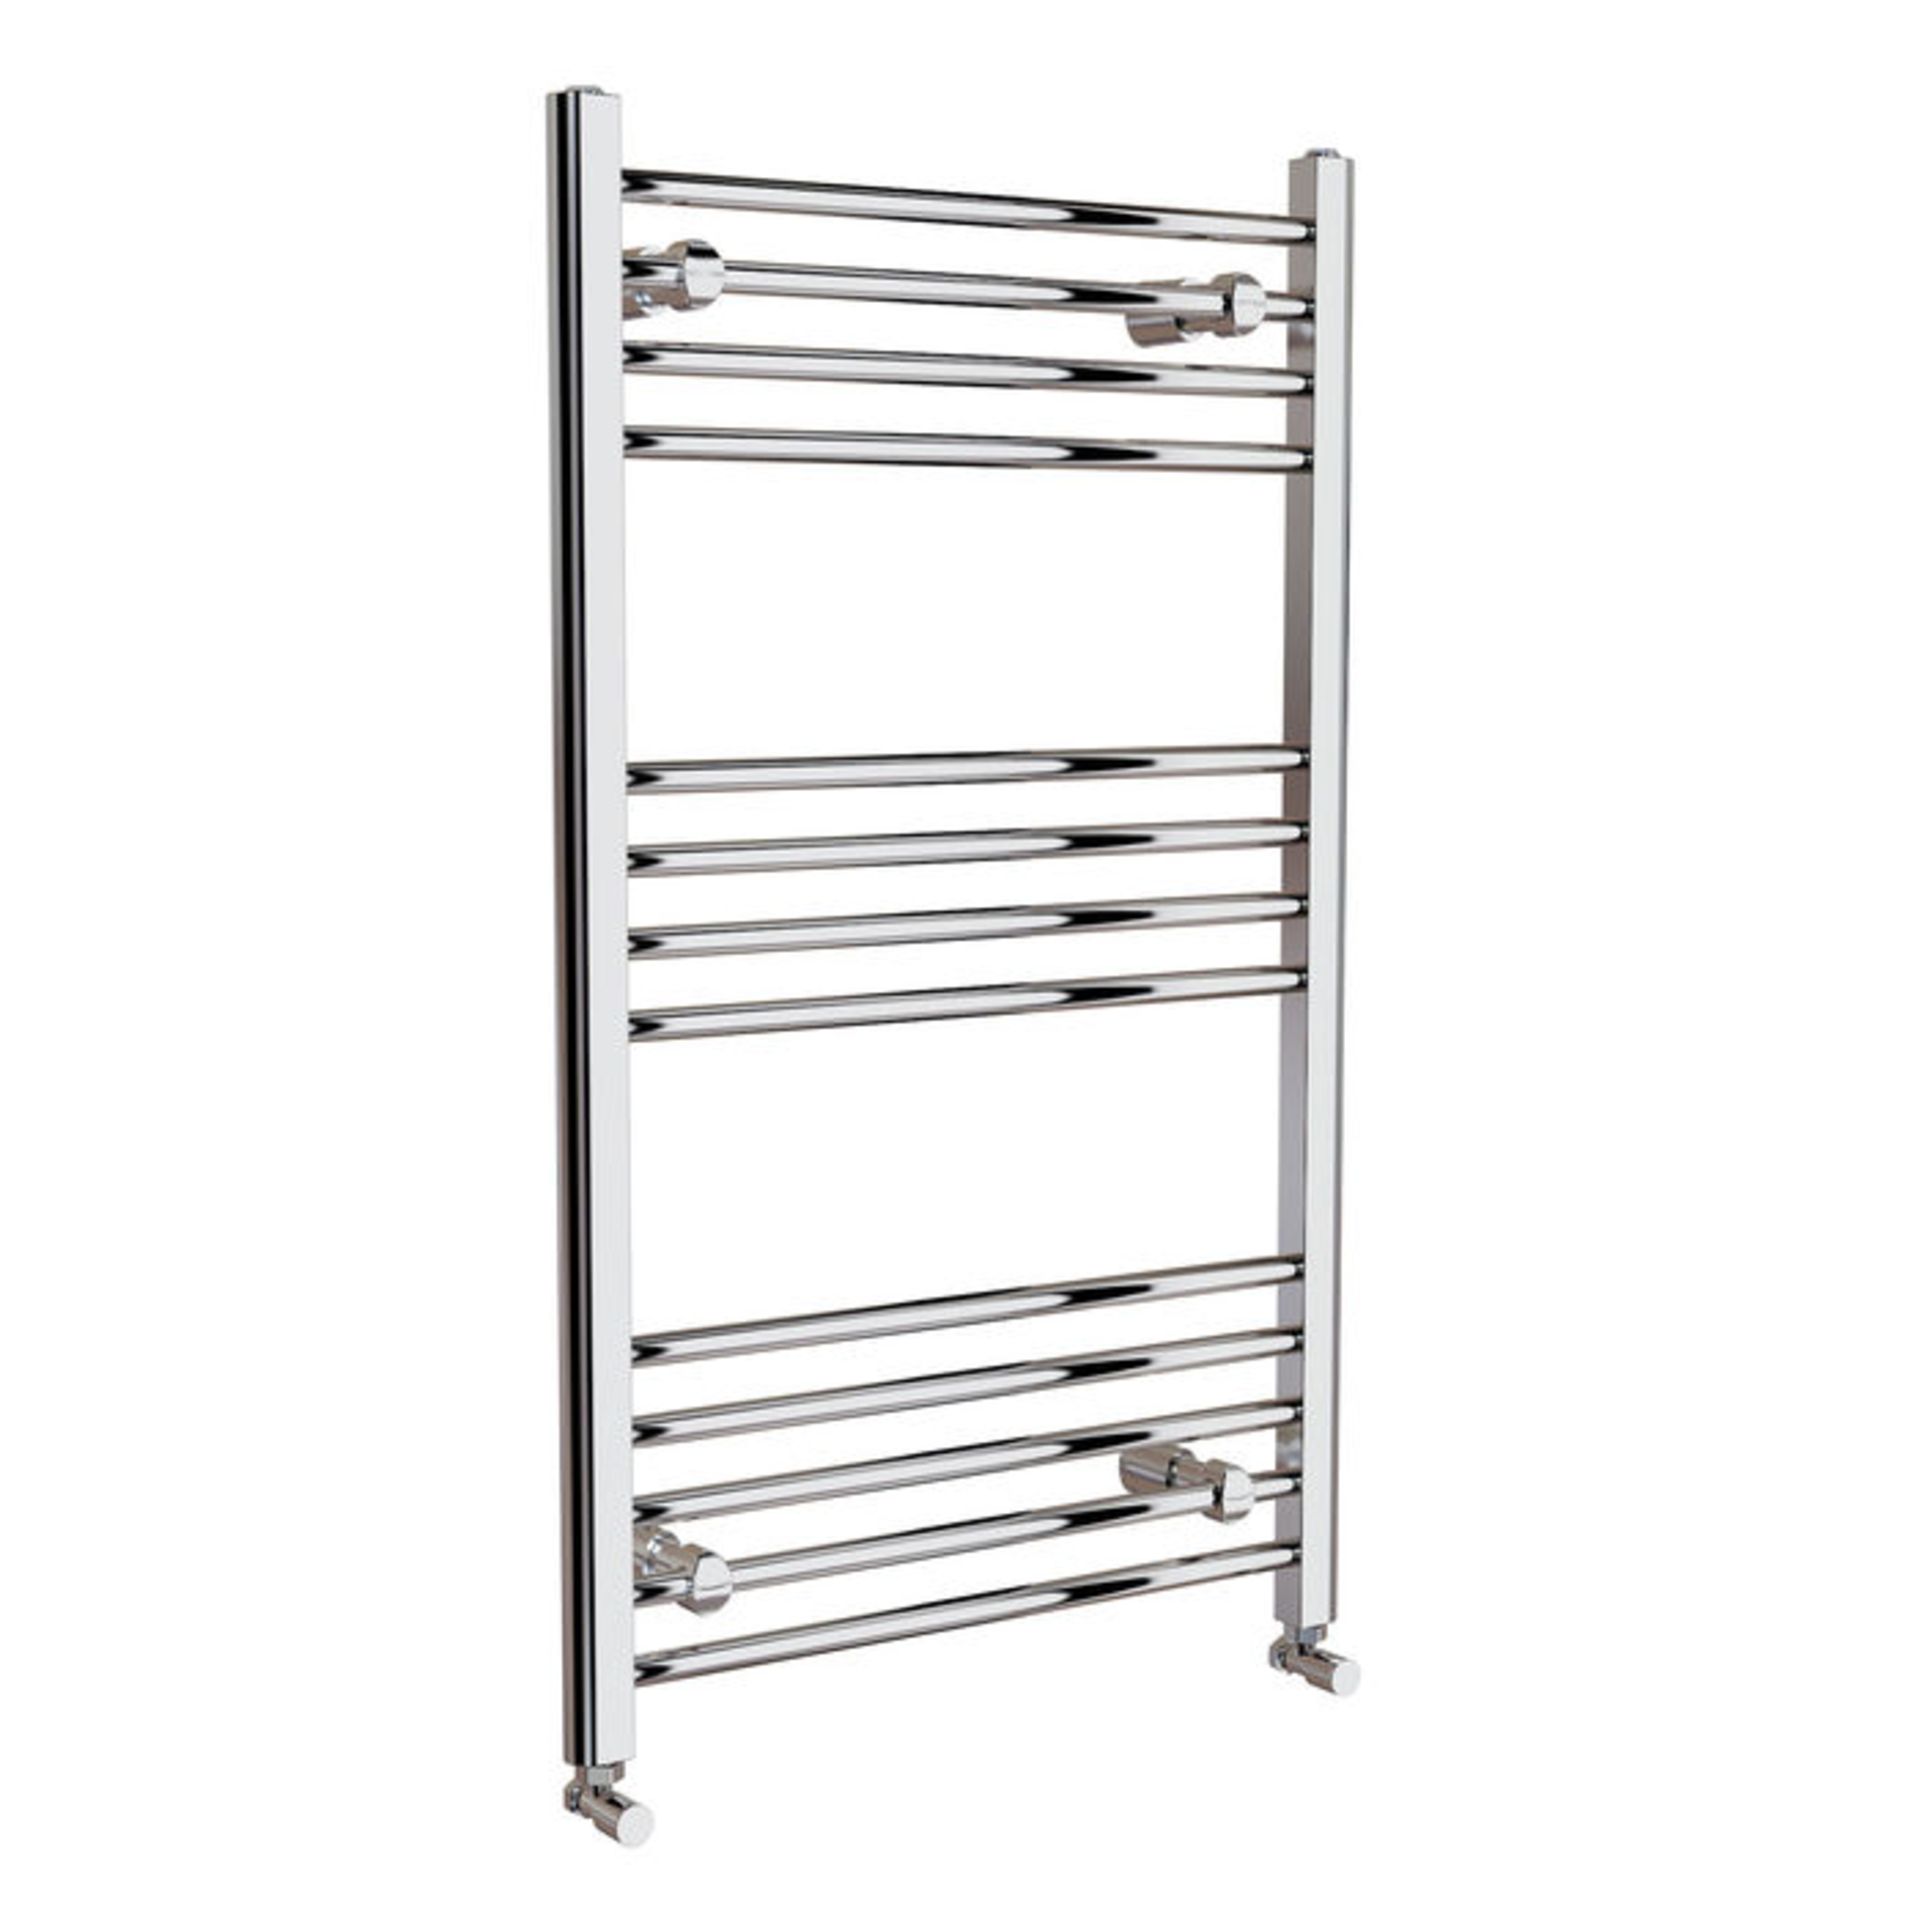 (S139) 1000x600mm - 20mm Tubes - Chrome Heated Straight Rail Ladder Towel Radiator. Low carbon steel - Image 3 of 3